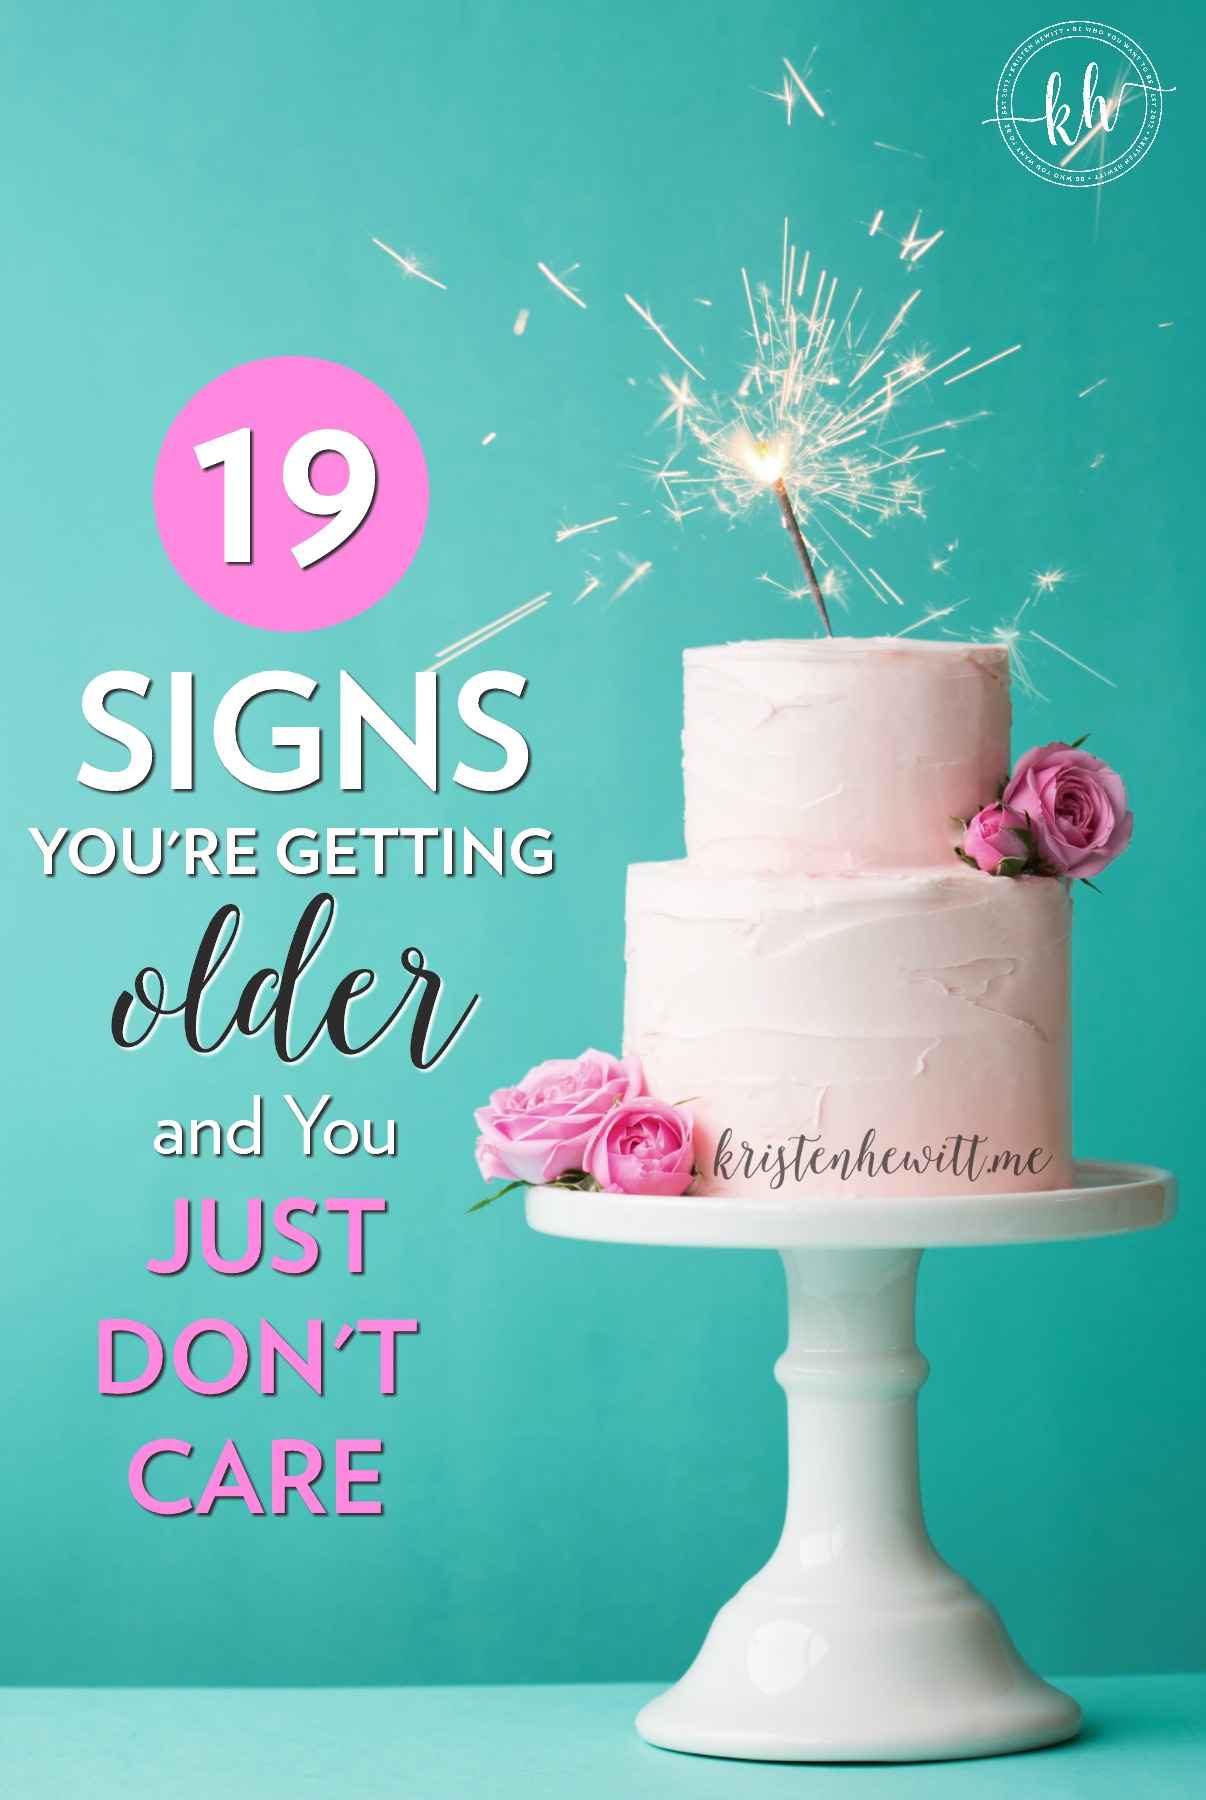 Are you tired of worrying about your age? Don't! Embrace it with humor! Here are 19 Signs You're Getting Older and you Just Don't Care!